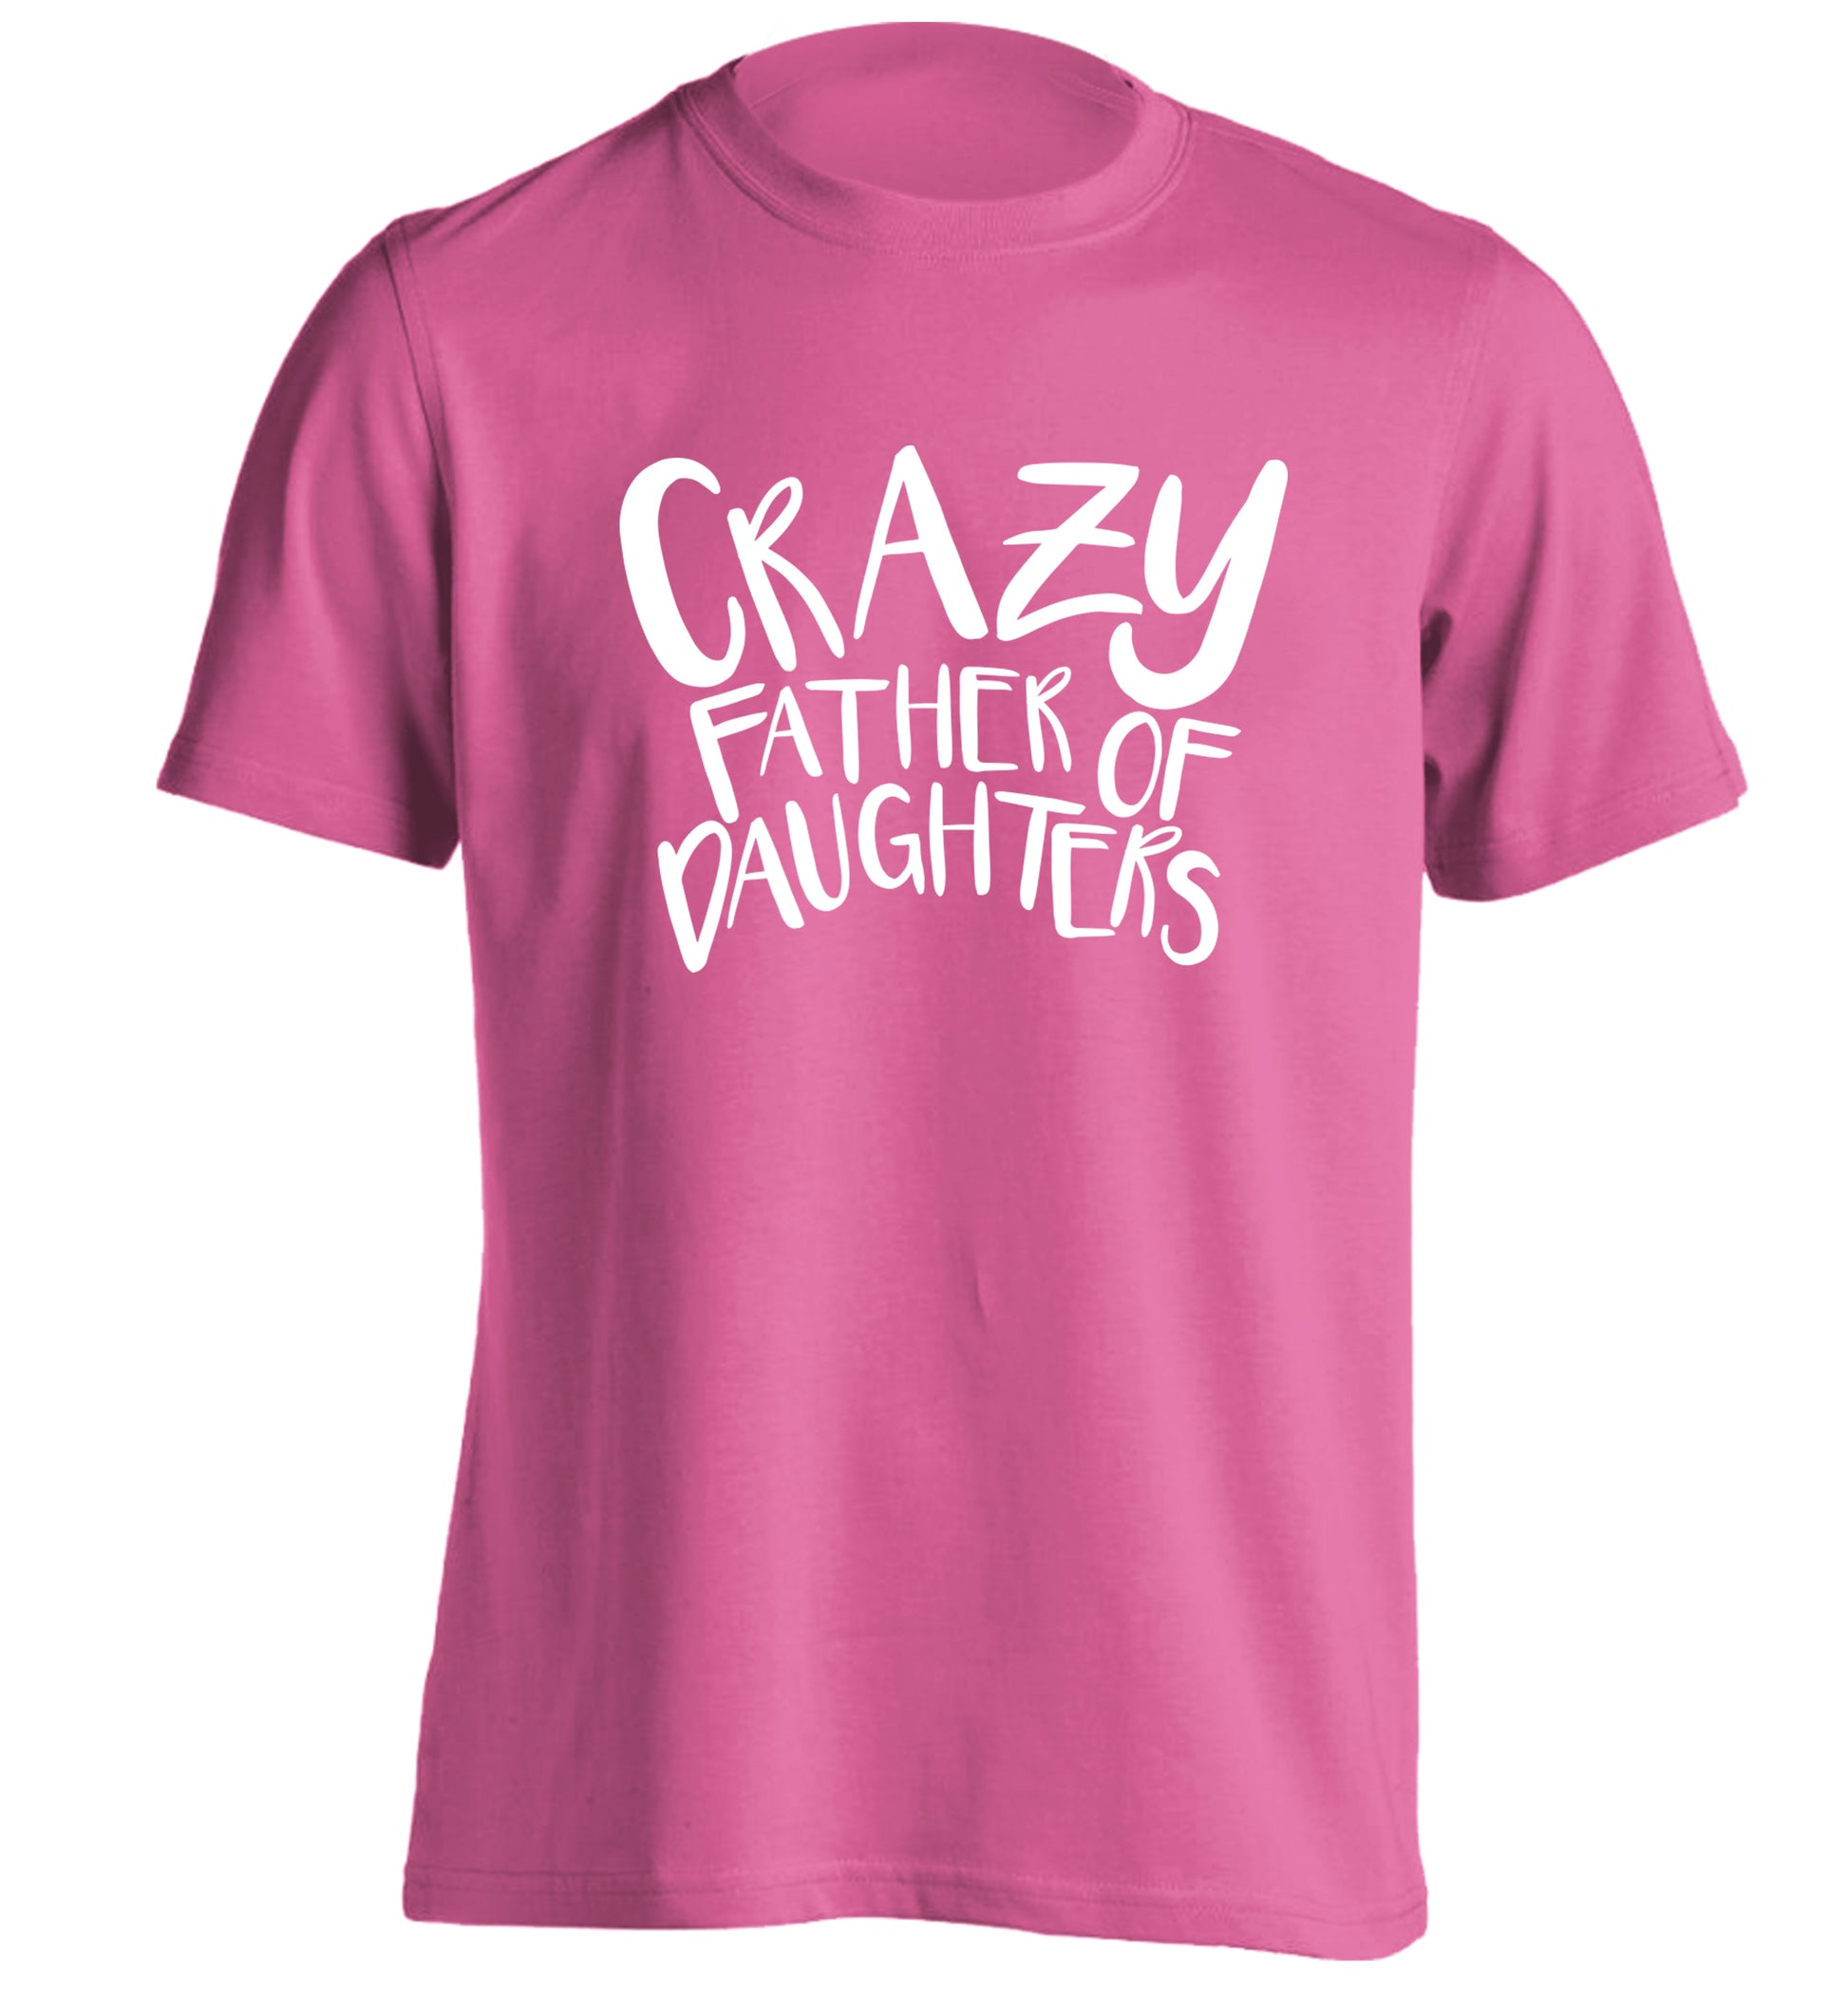 Crazy father of daughters adults unisex pink Tshirt 2XL